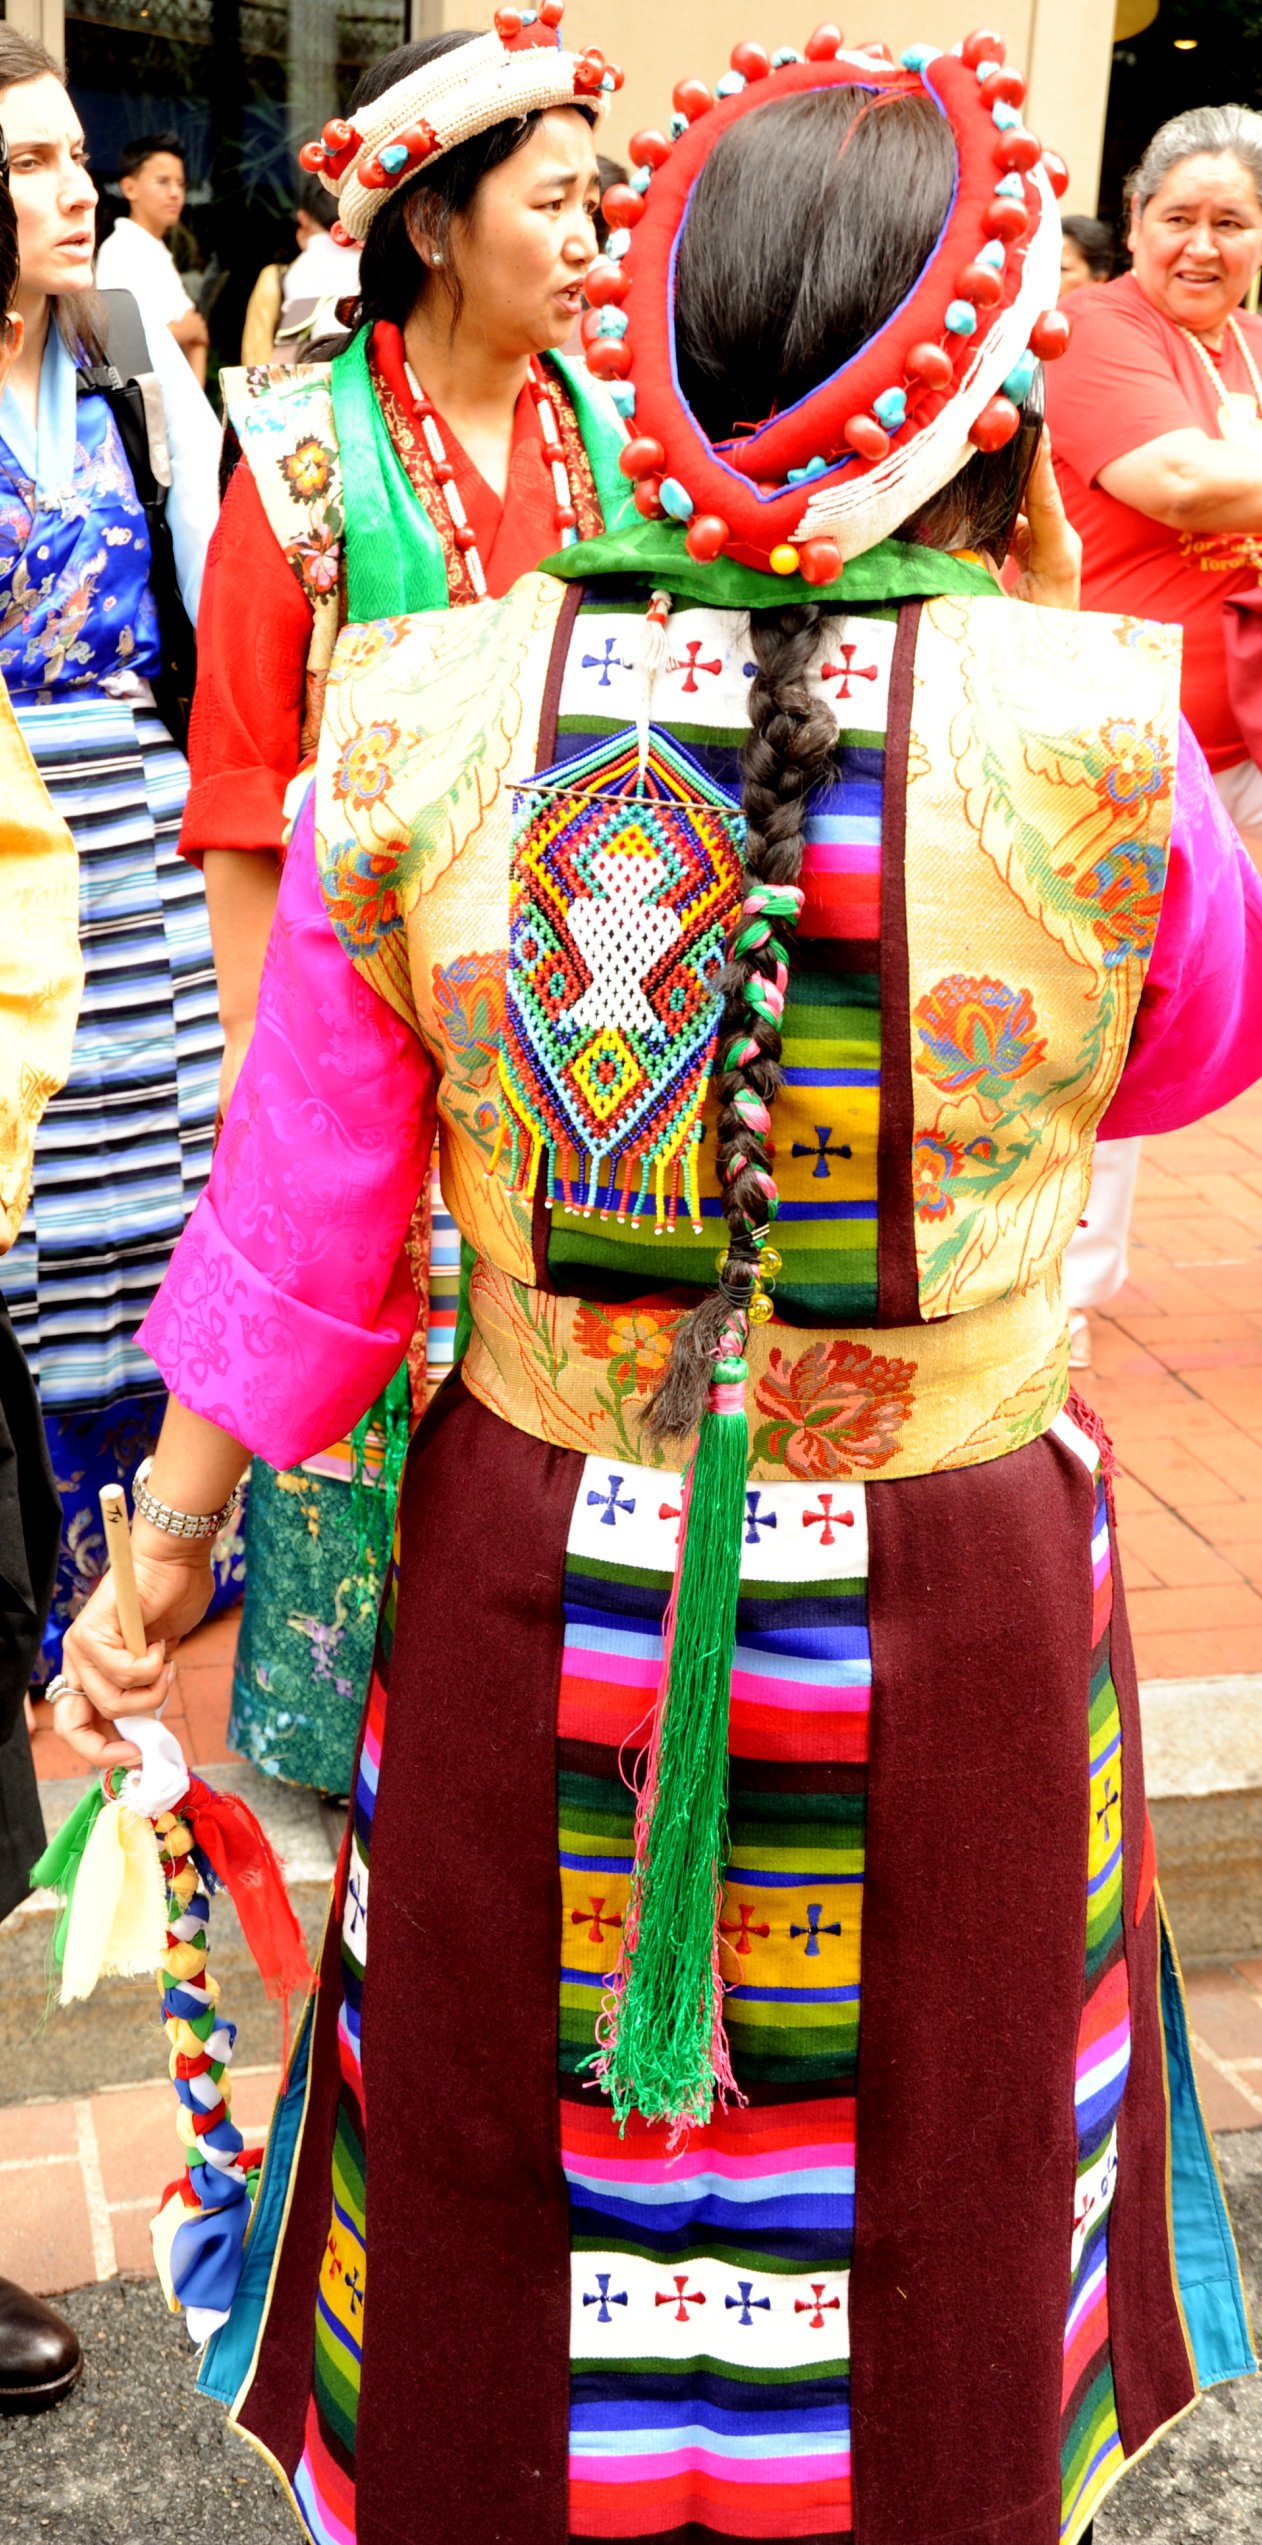 some women are dressed in colorful clothing